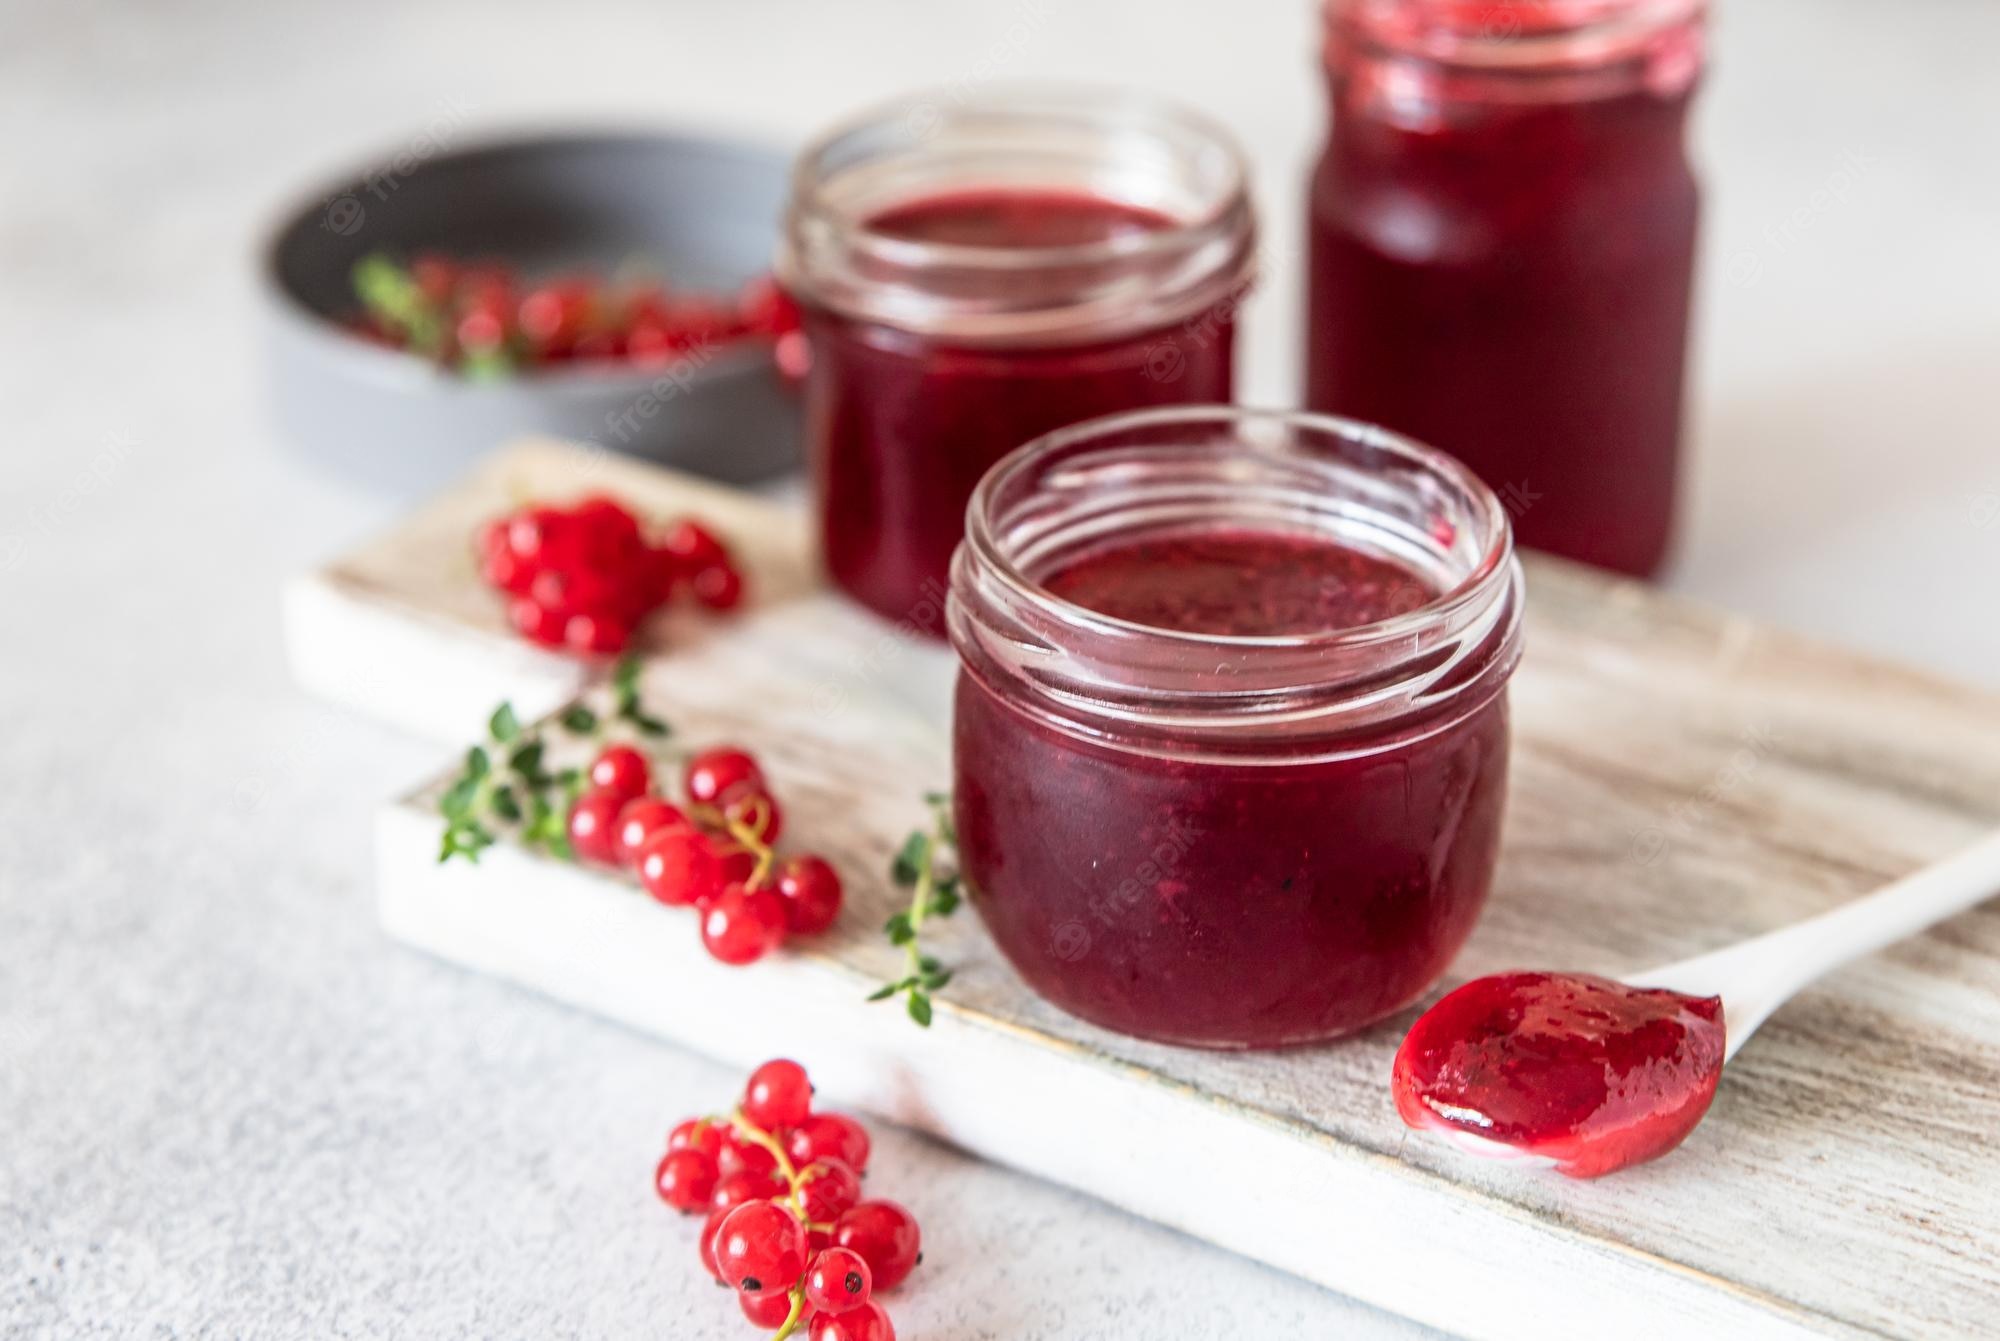 Premium Photo | Homemade red currant jam or jelly in glass jars and red currants berries